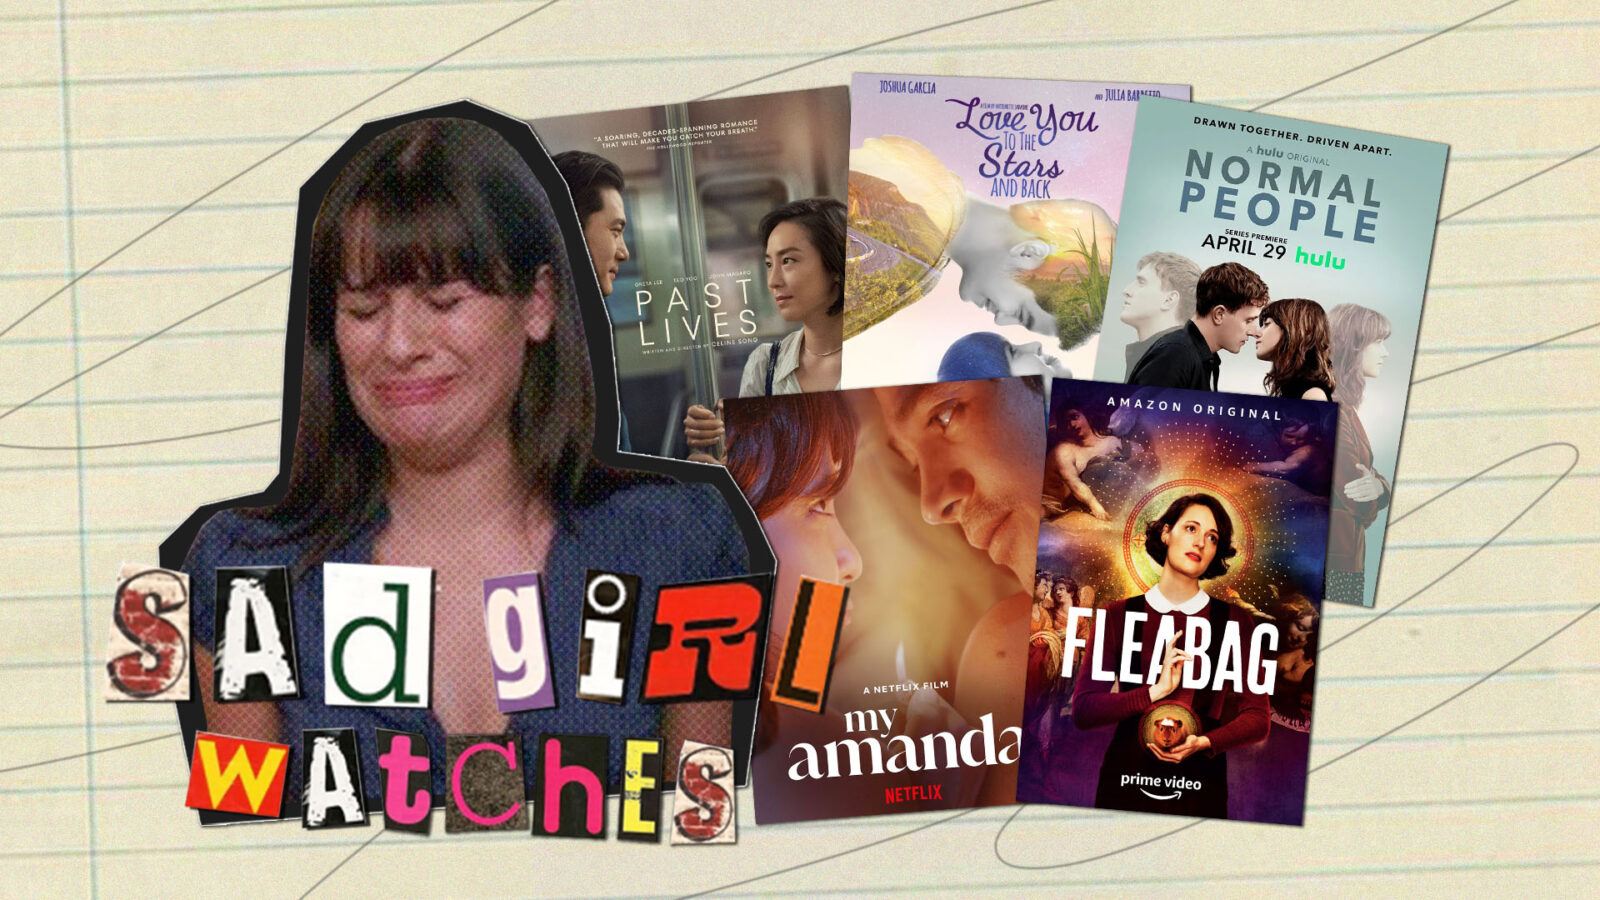 Media For The Sad Girl: 10 Movies And Shows To Watch When You Need A Good Cry